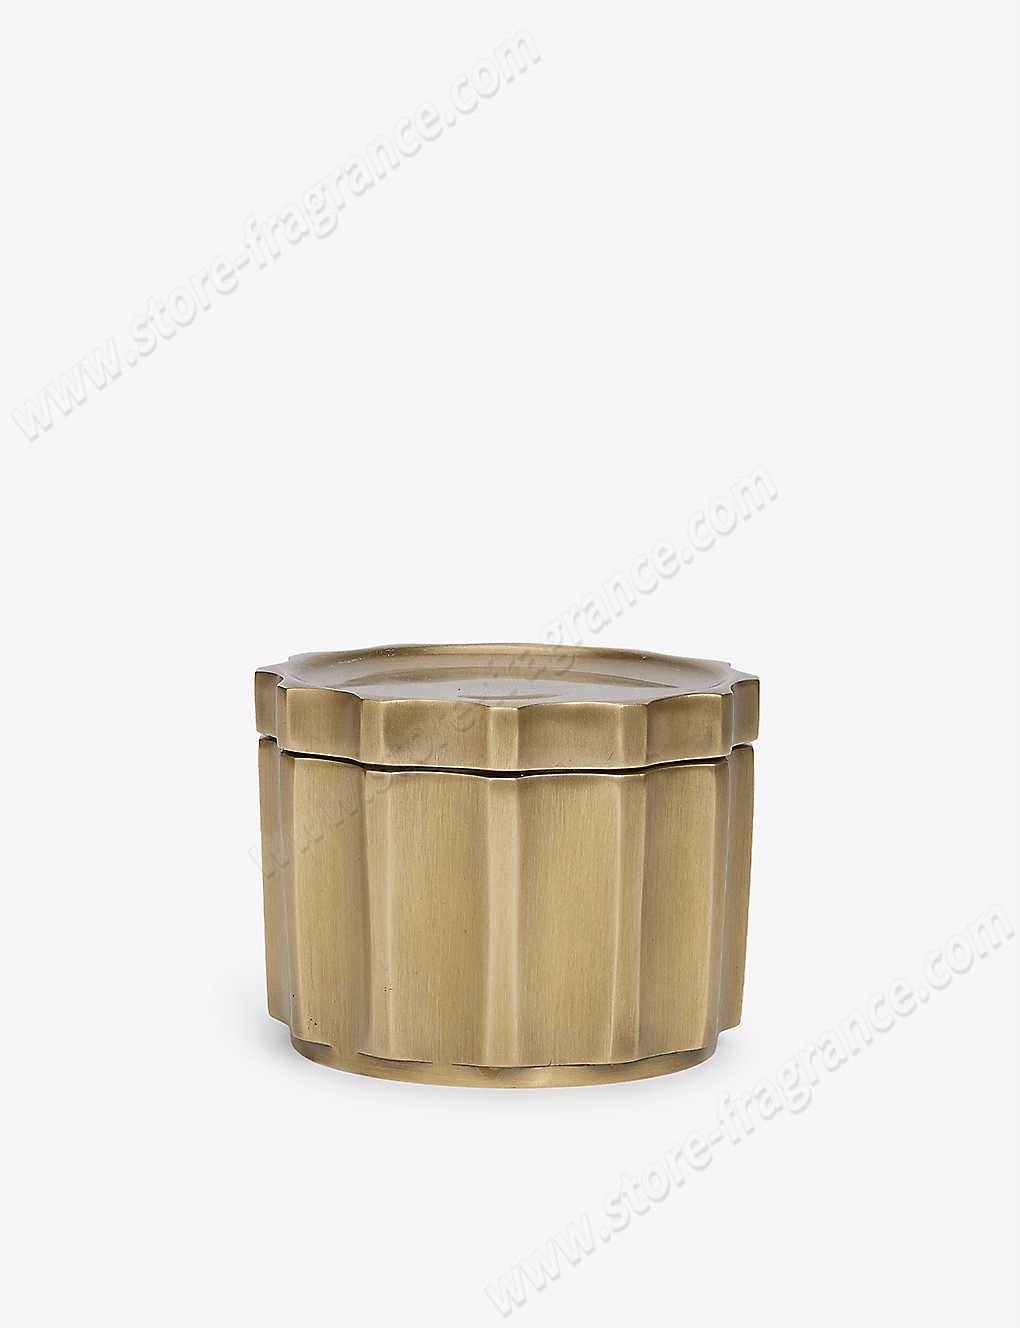 SOHO HOME/Cavendish brass candle 220g ✿ Discount Store - SOHO HOME/Cavendish brass candle 220g ✿ Discount Store